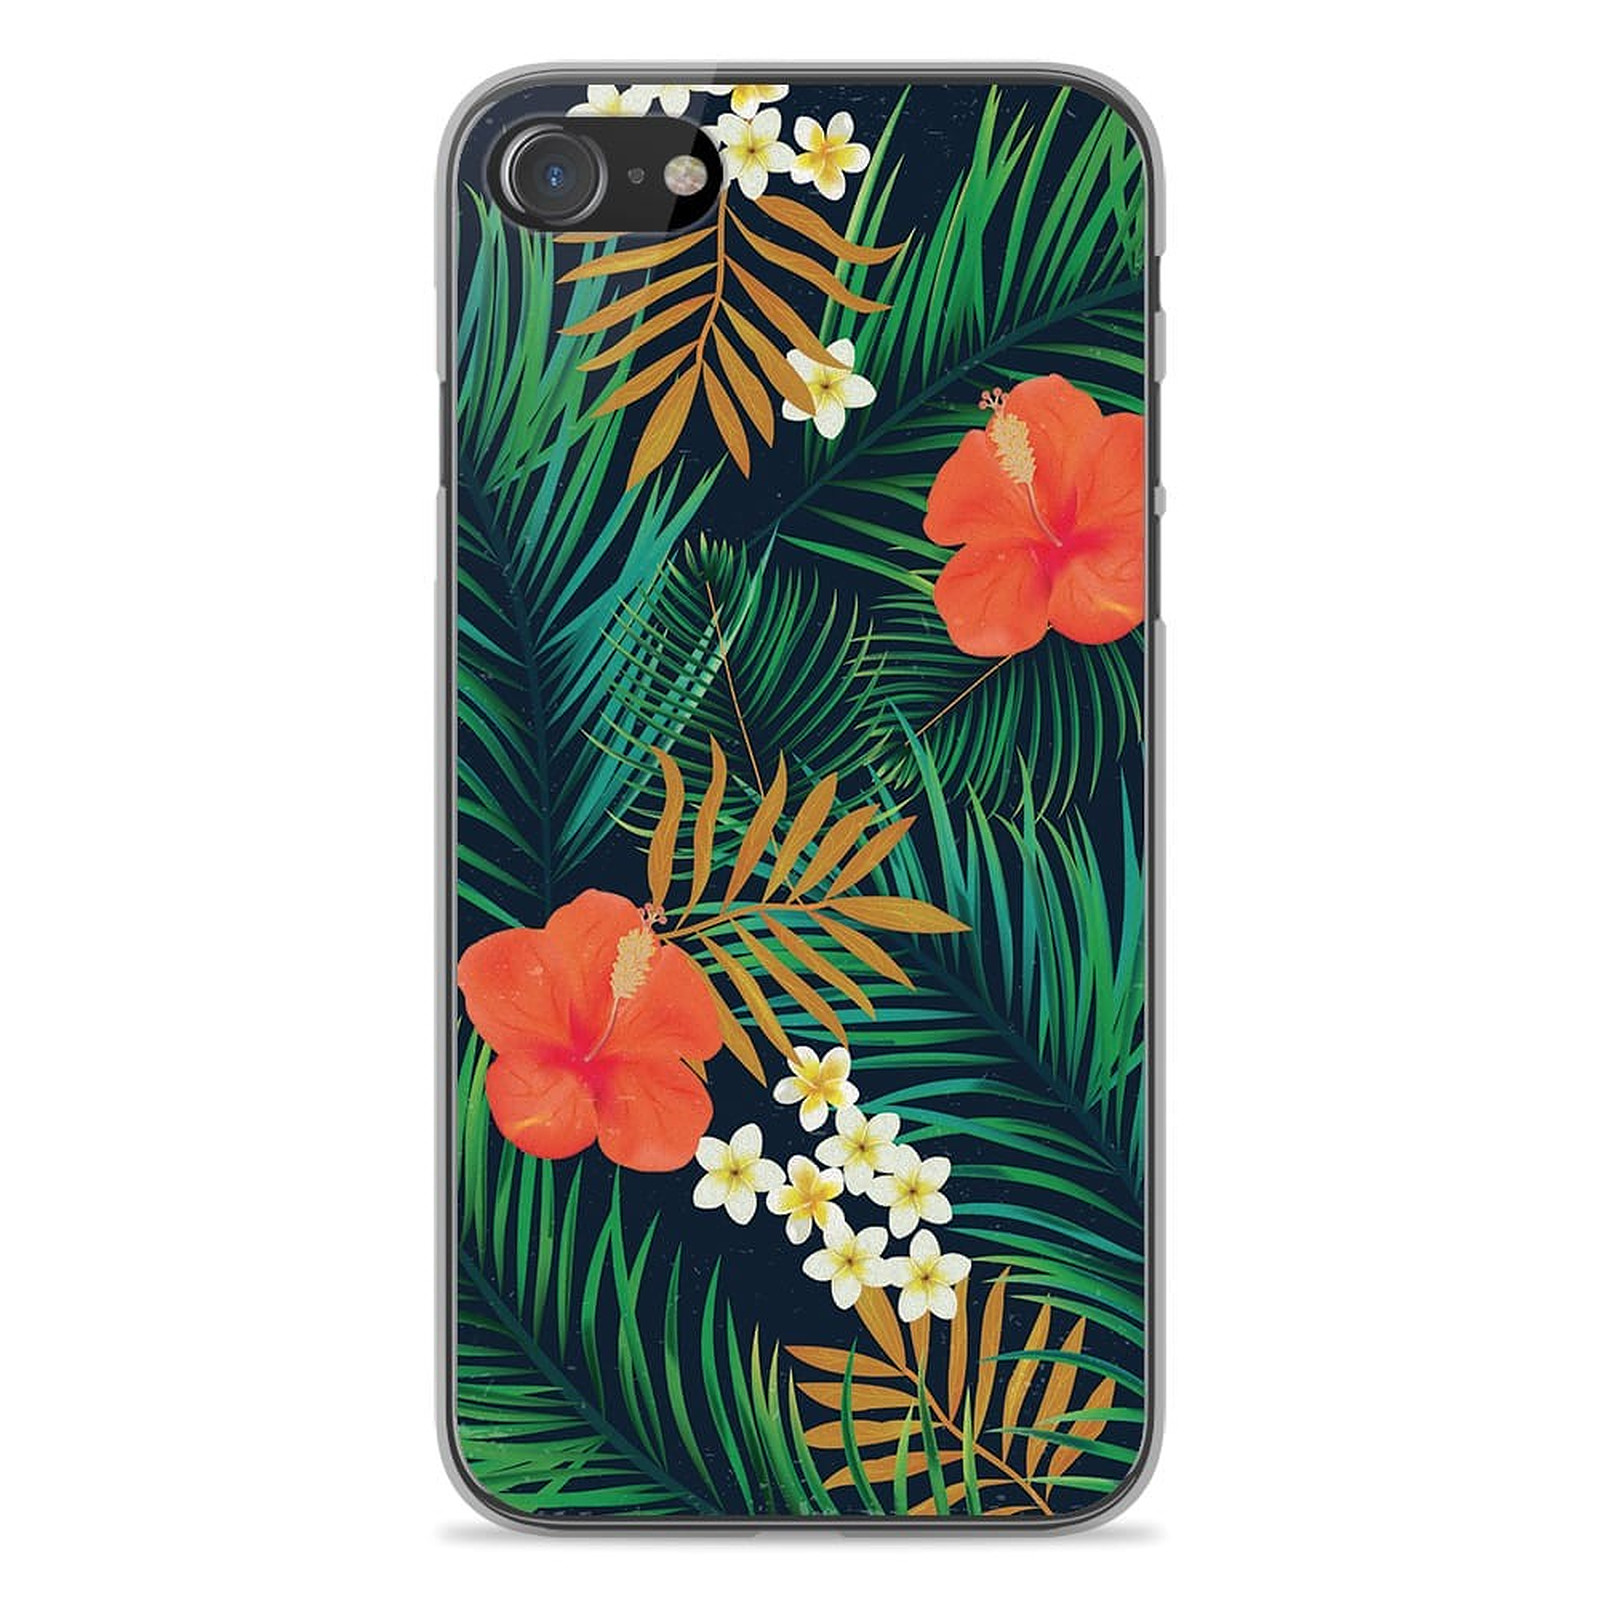 1001 Coques Coque silicone gel Apple iPhone SE 2020 motif Tropical - Coque telephone 1001Coques